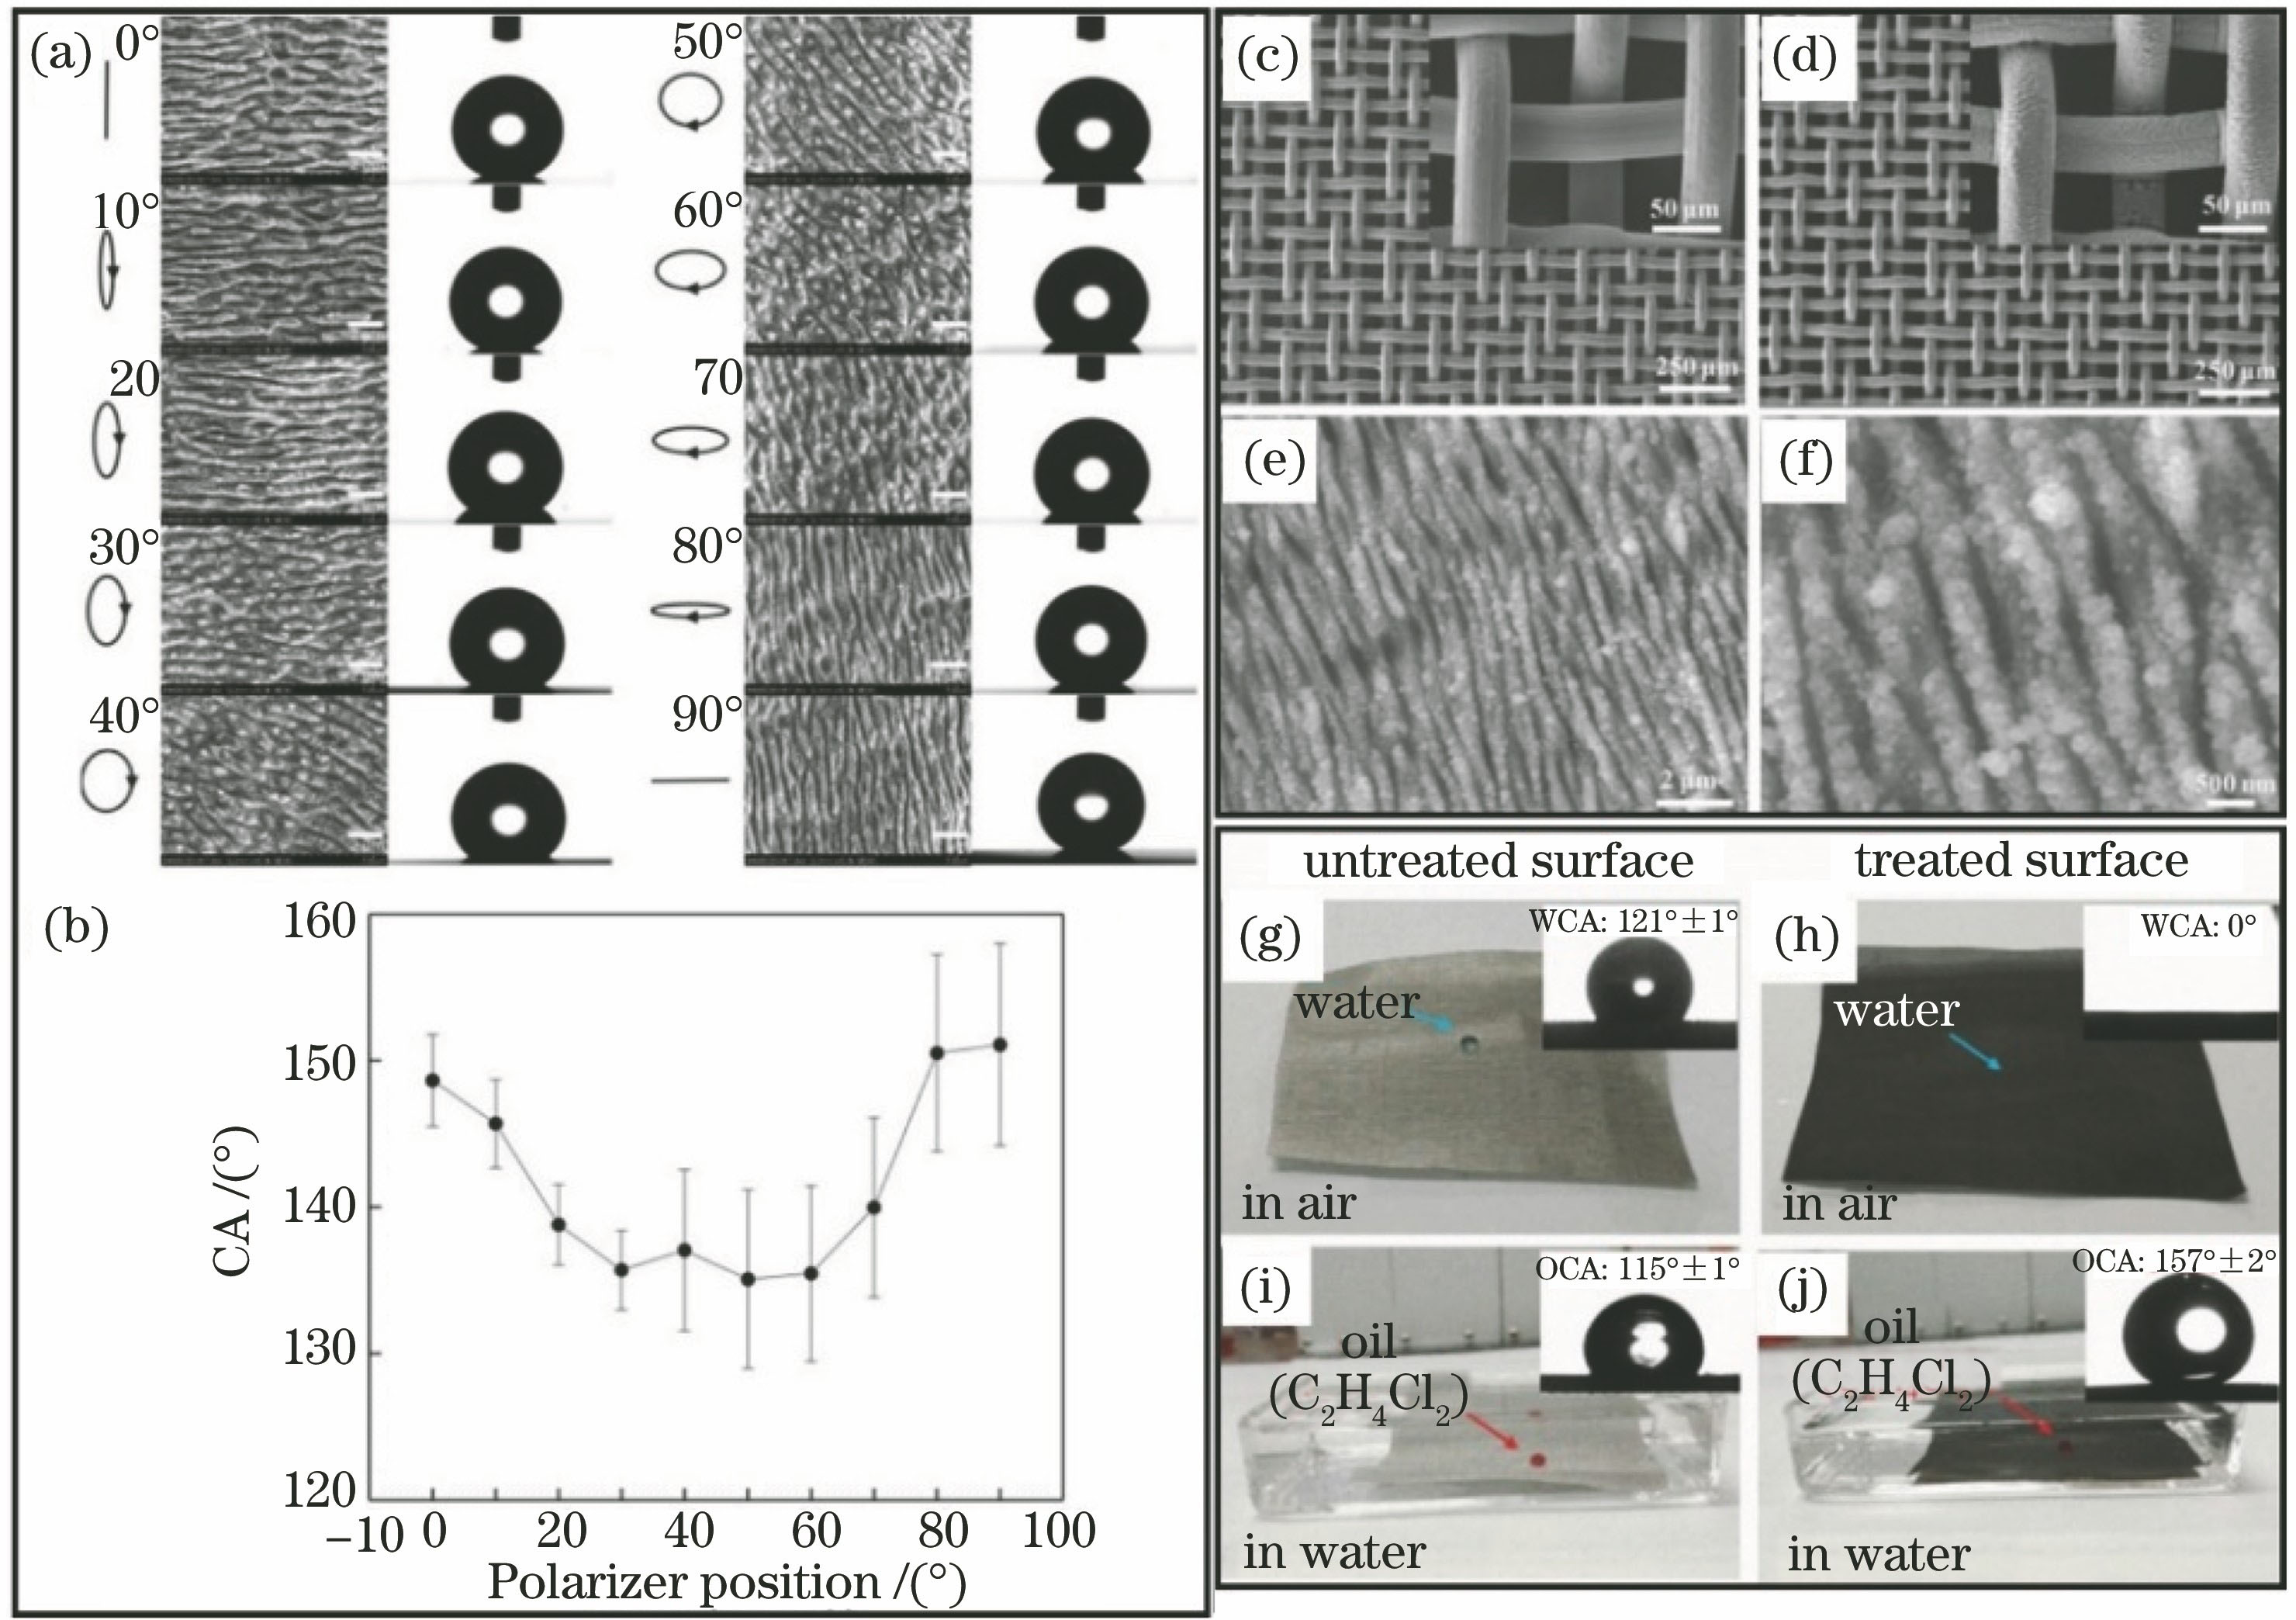 Surface periodic fringe structure induced by femtosecond laser and wettability regulation. (a) (b) Change direction of stripe by adjusting polarization direction of laser and control surface wettability[65]; (c)-(f) periodic stripe structure obtained by scanning on stainless steel[66]; (g)-(j) surfaces are superhydrophilic and underwater superoleophobic